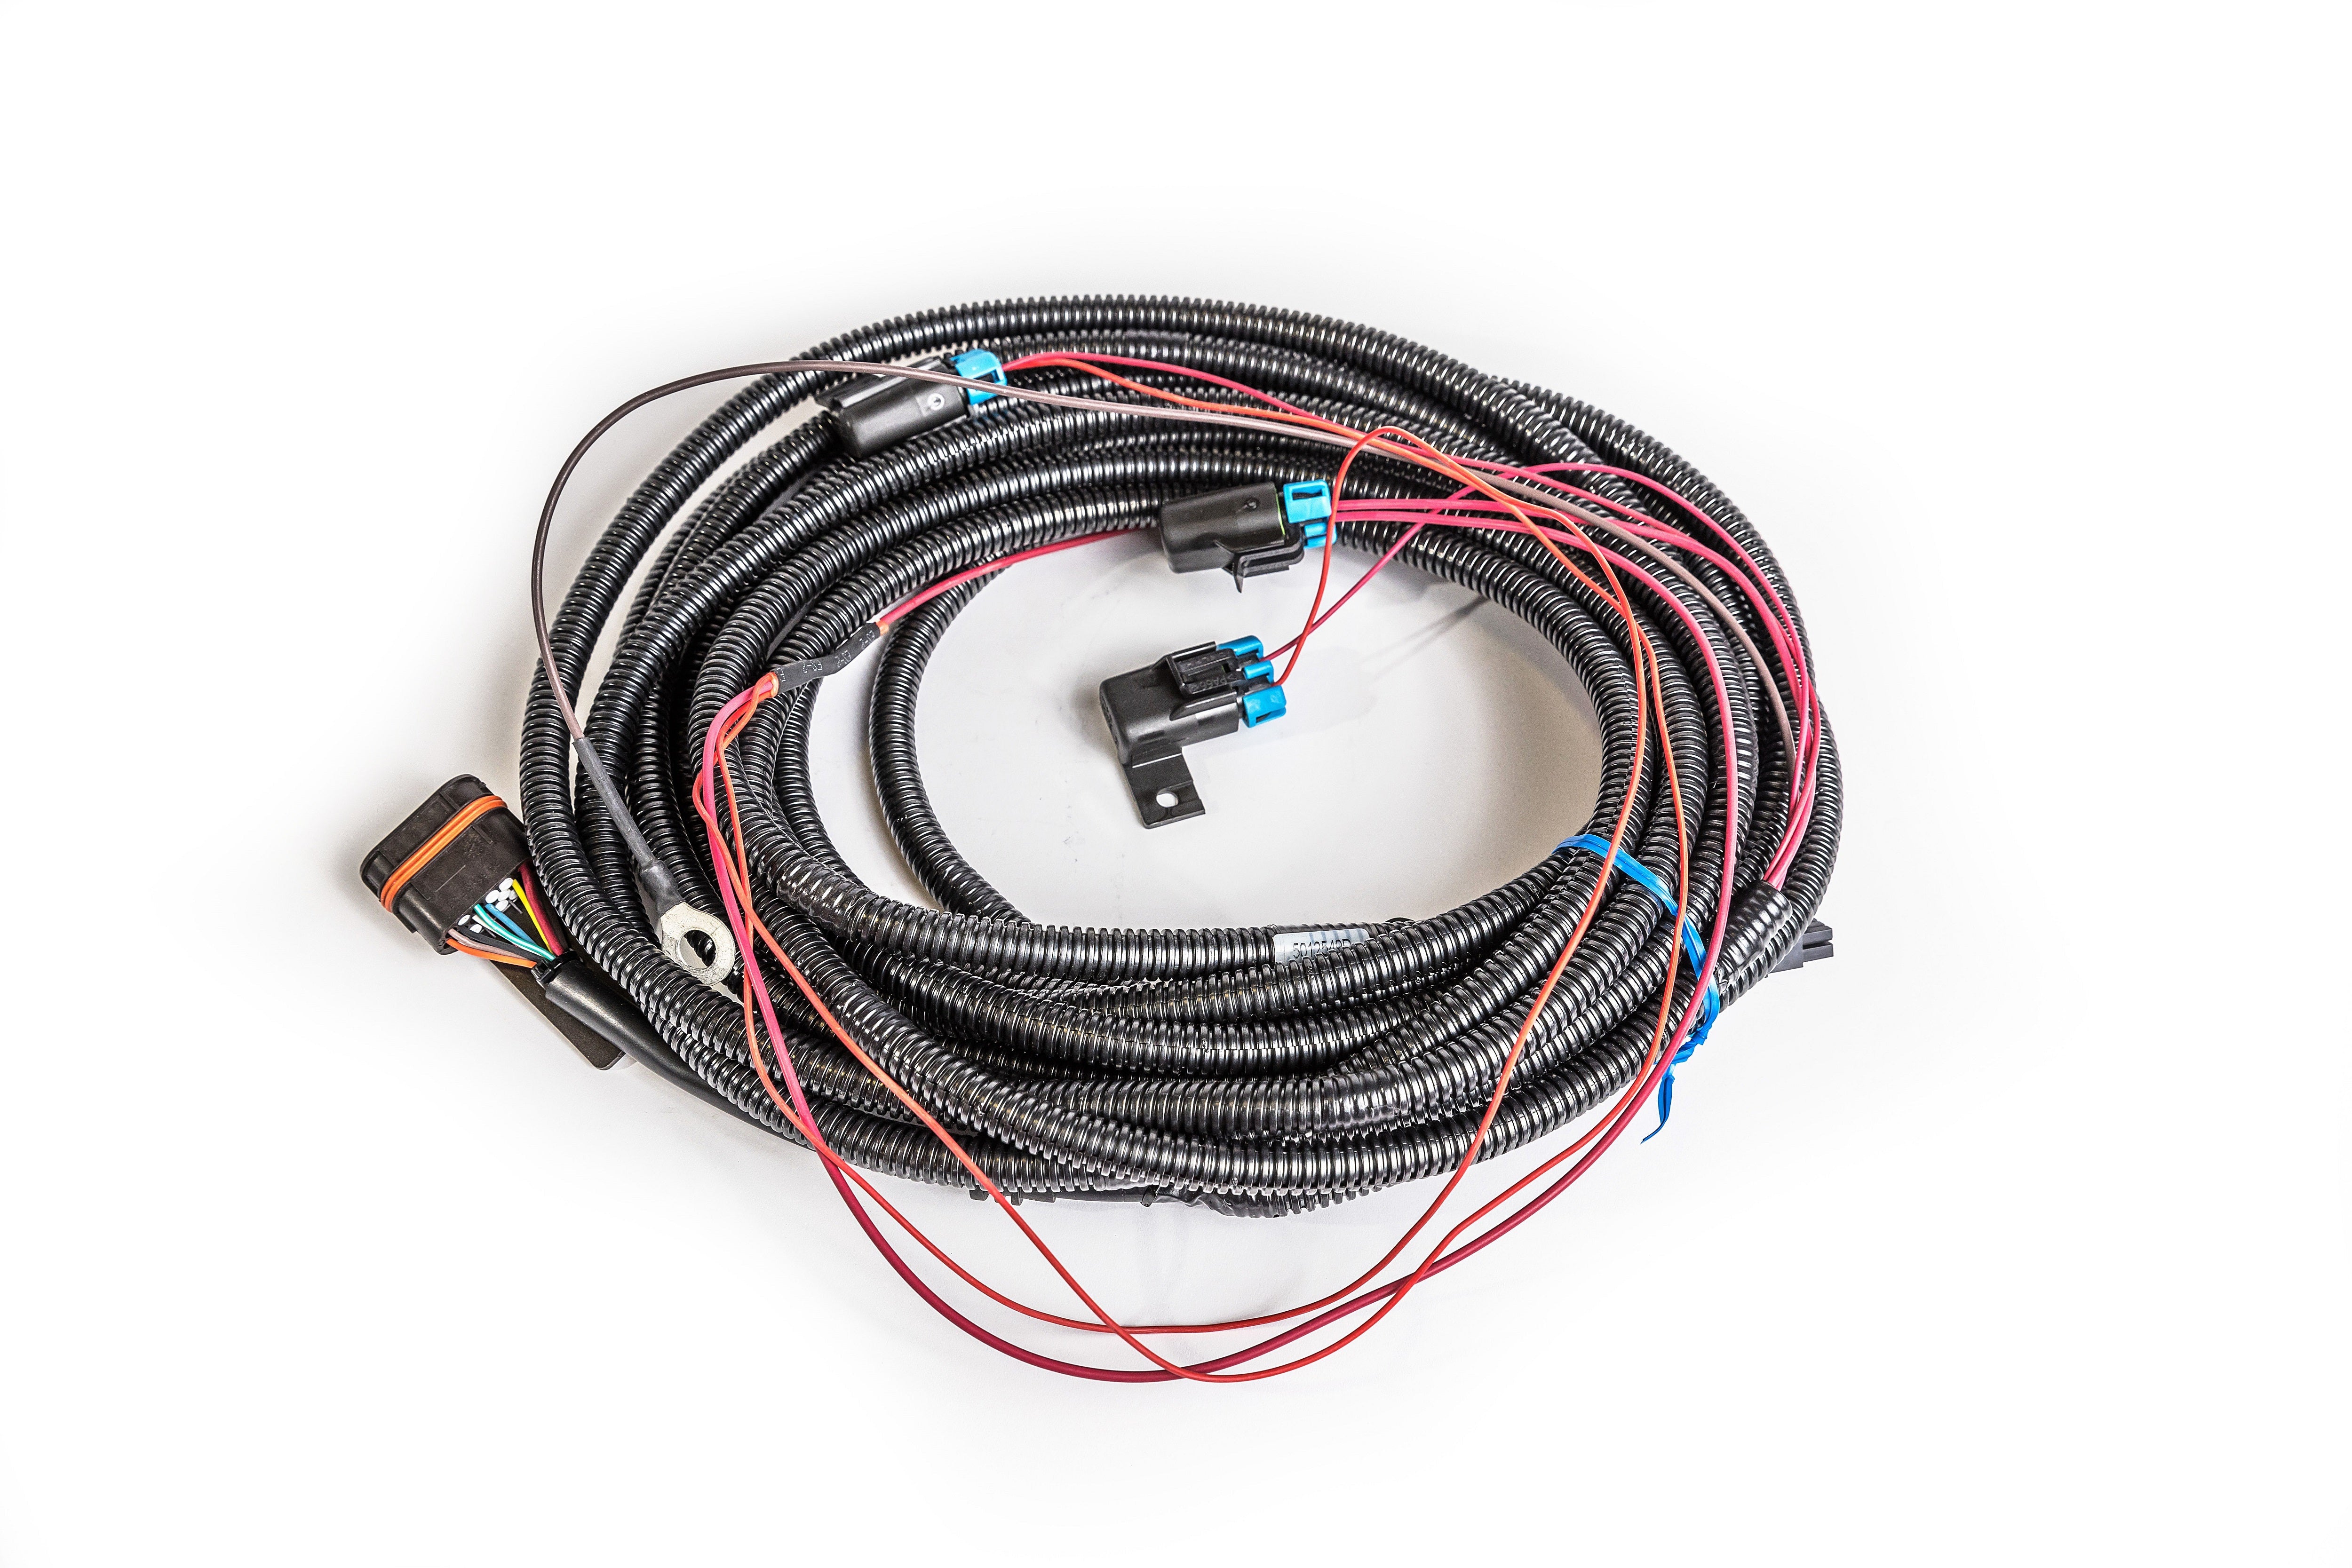 Webasto Wiring Harness Complete For Smartemp 2.0 Airtop 2000Stc 5012549D Heater Part